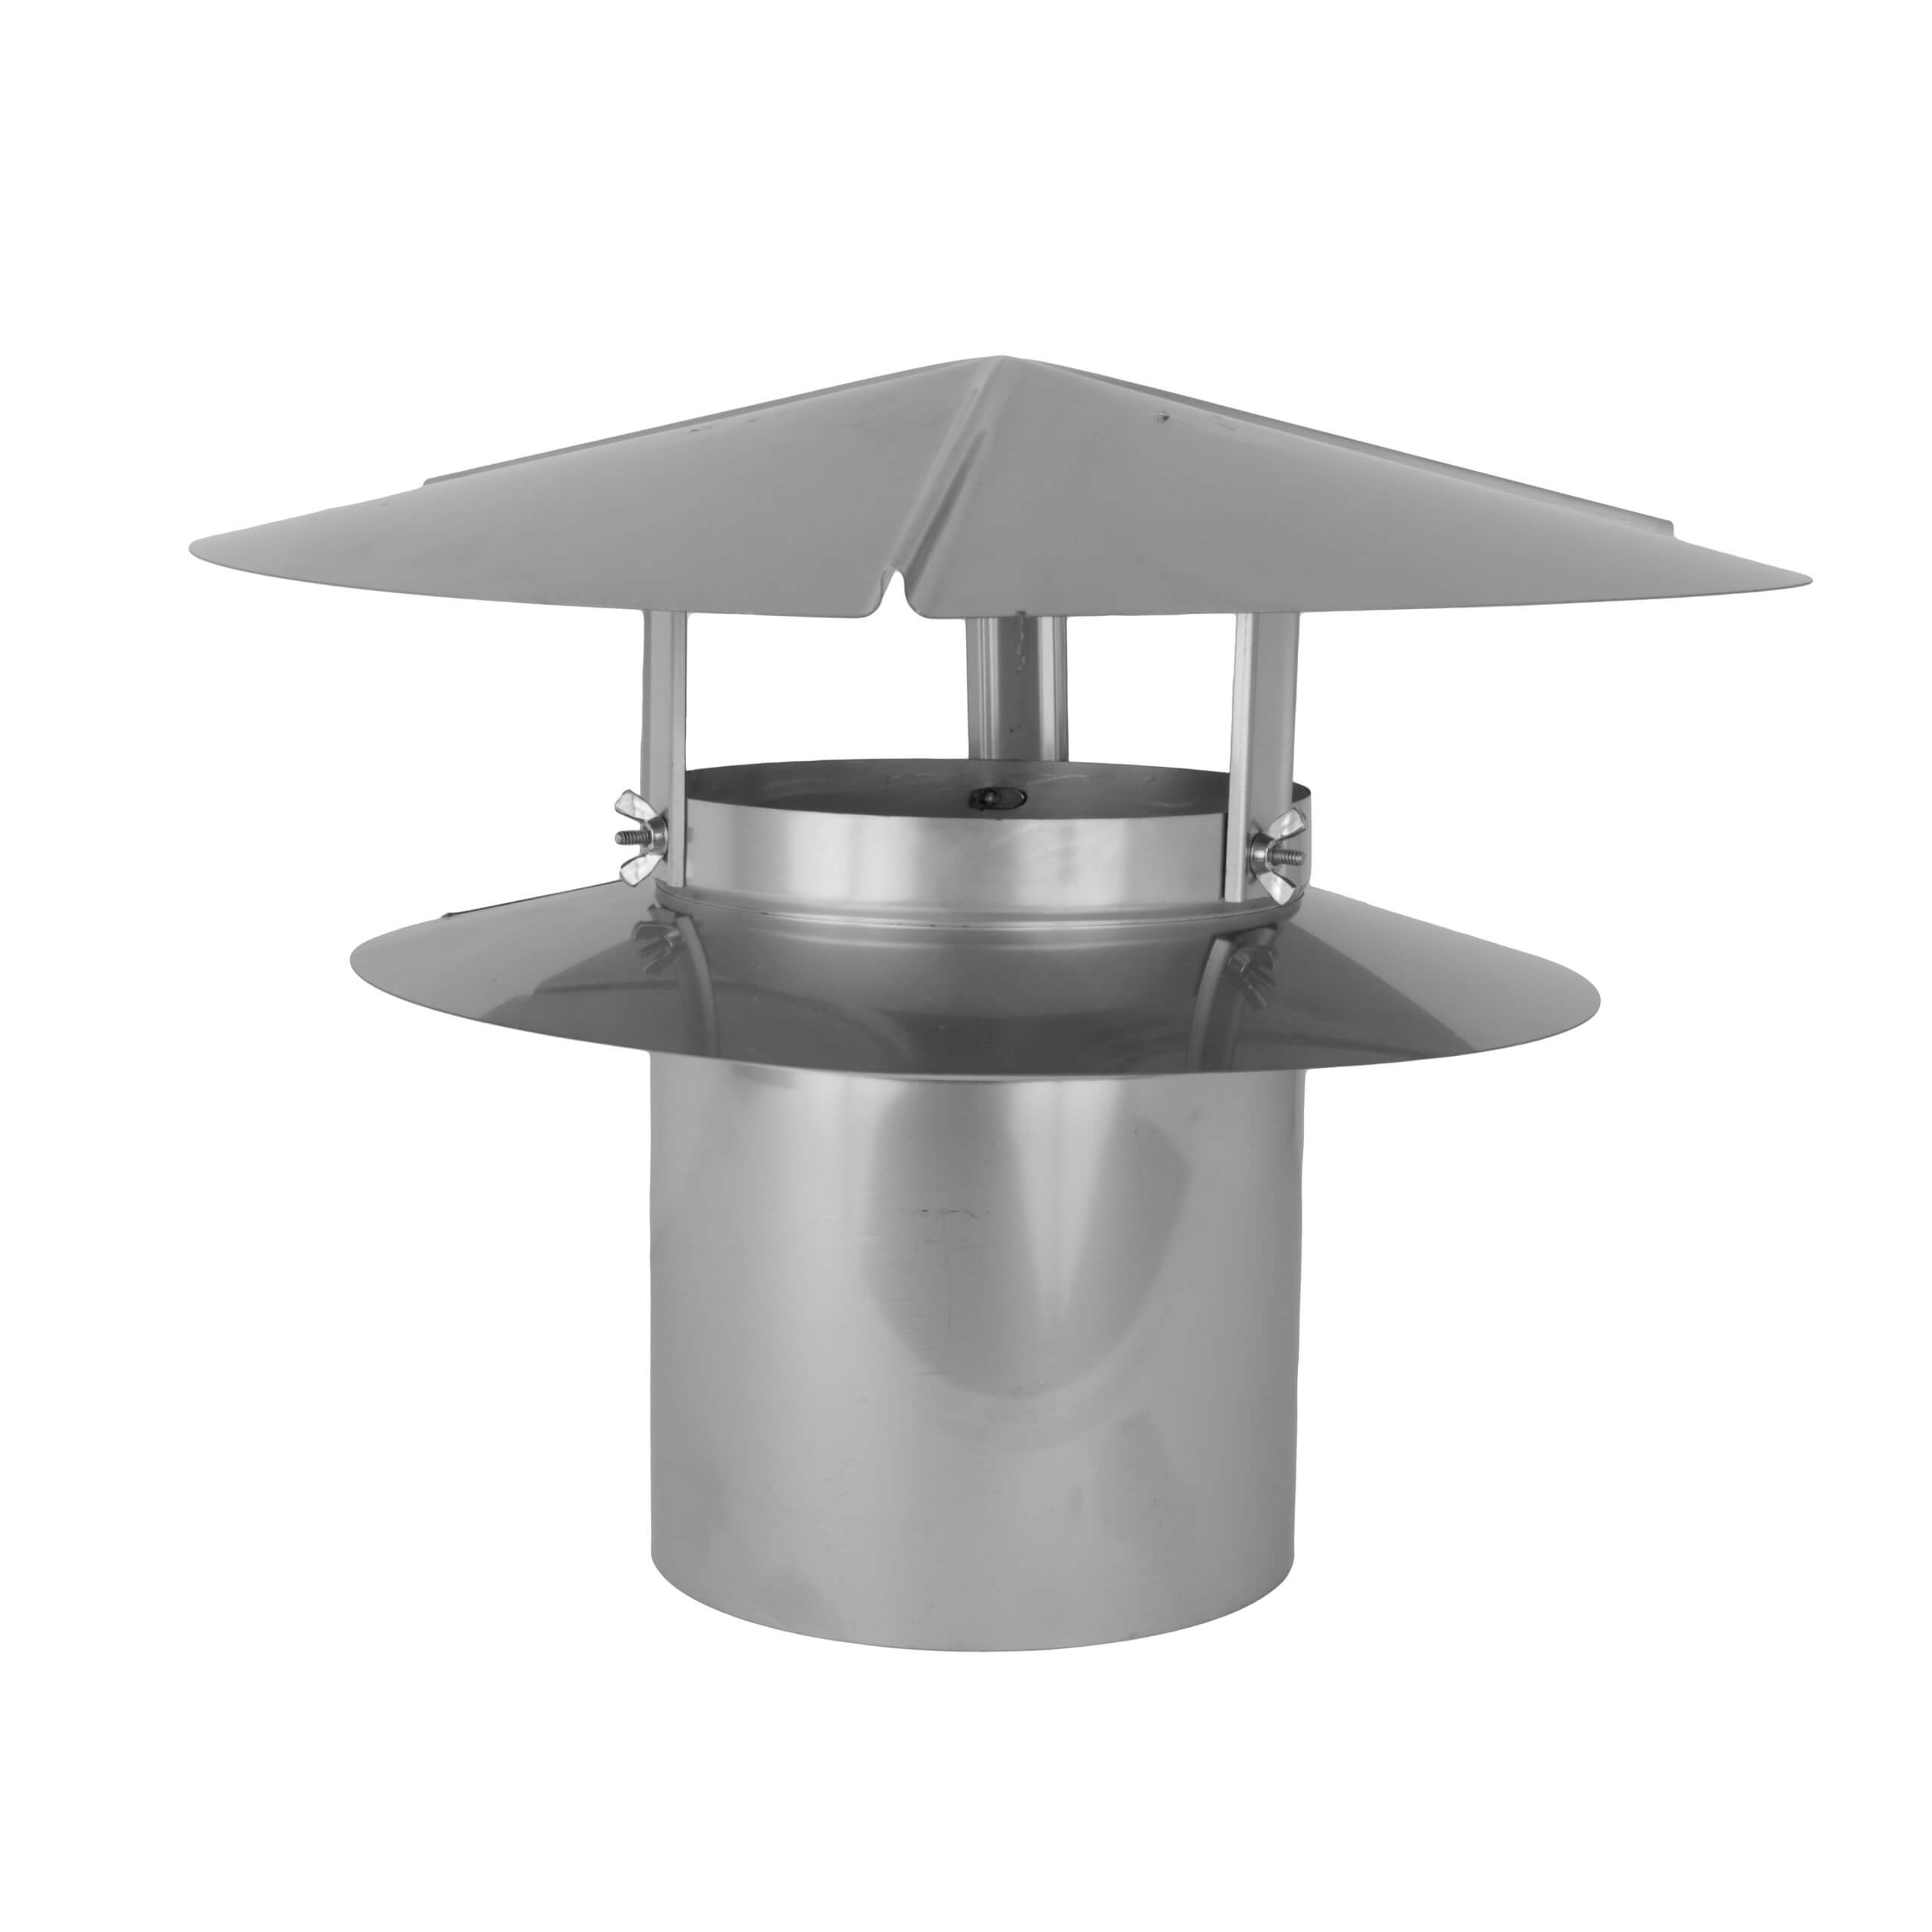 Round Chimney Cap Boost Stove Efficiency Fire Safe Design Stainless Steel 6 in 